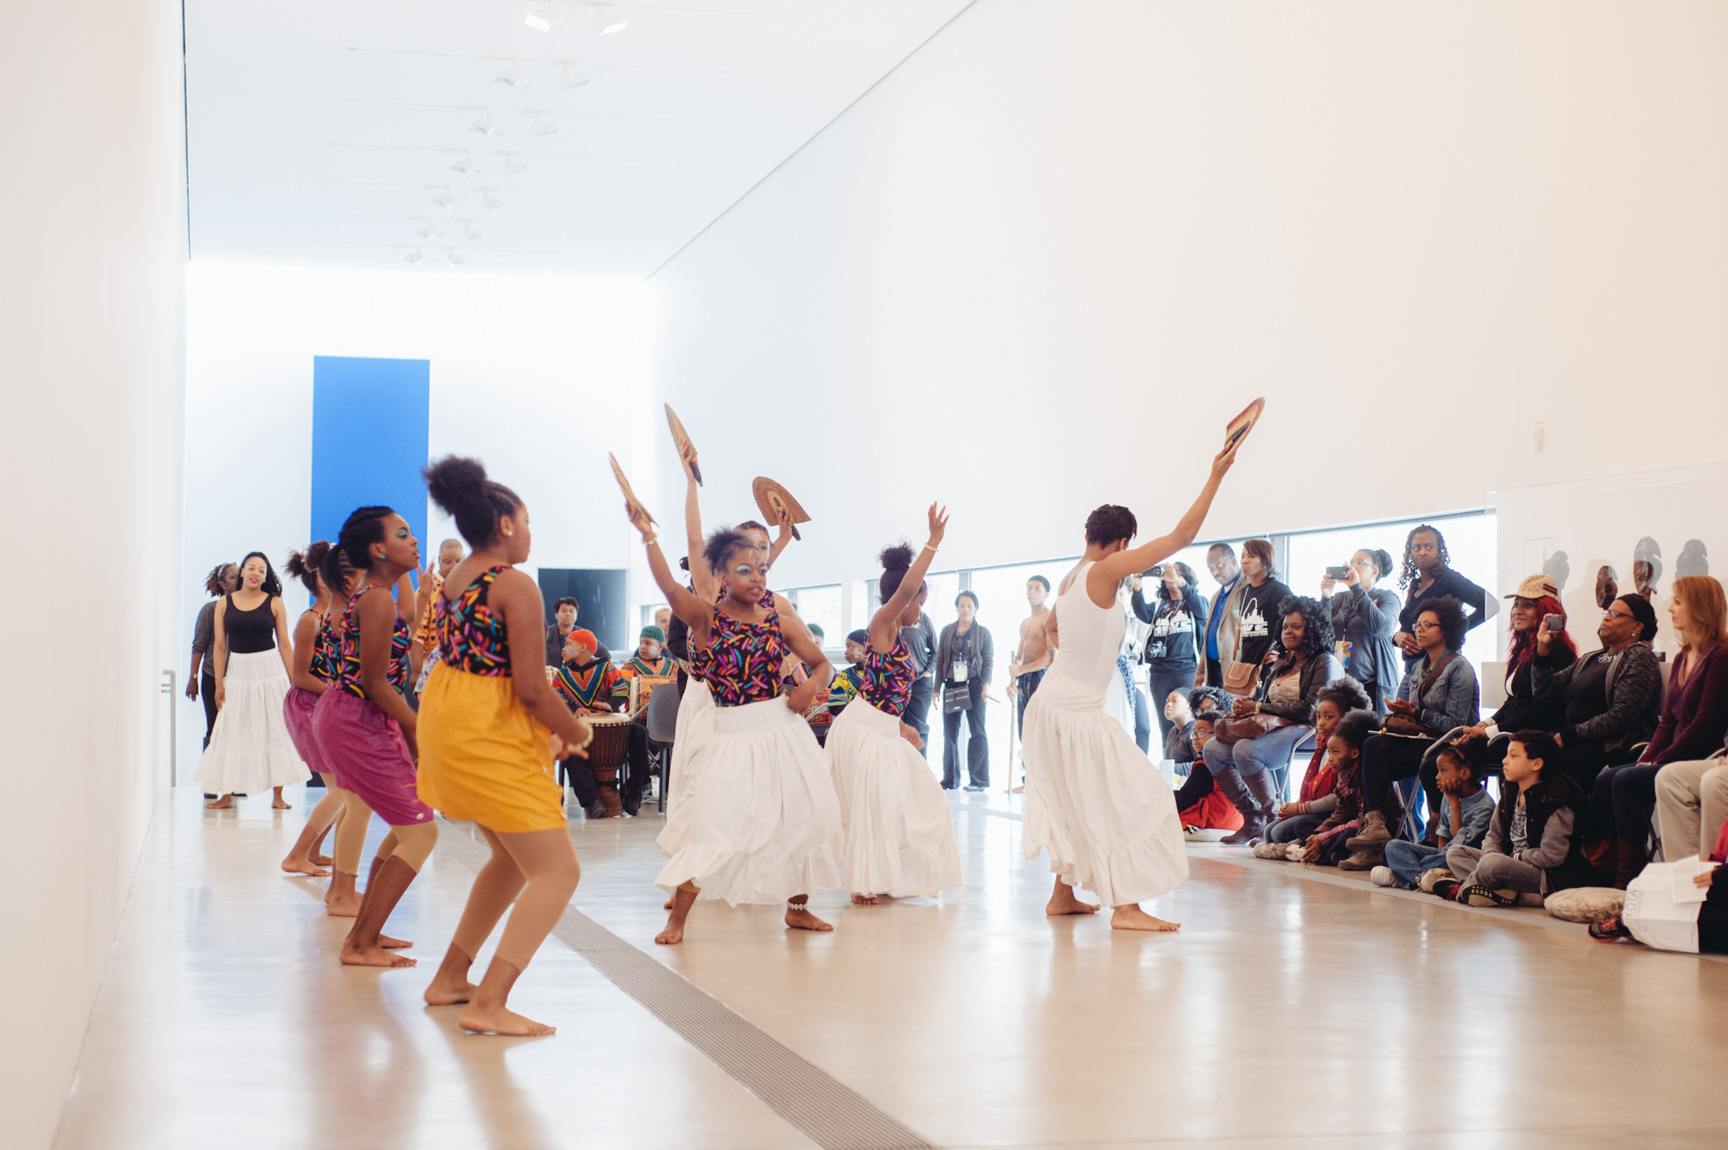 A large group of dancers perform an African inspired dance in the Main Gallery for an audience.